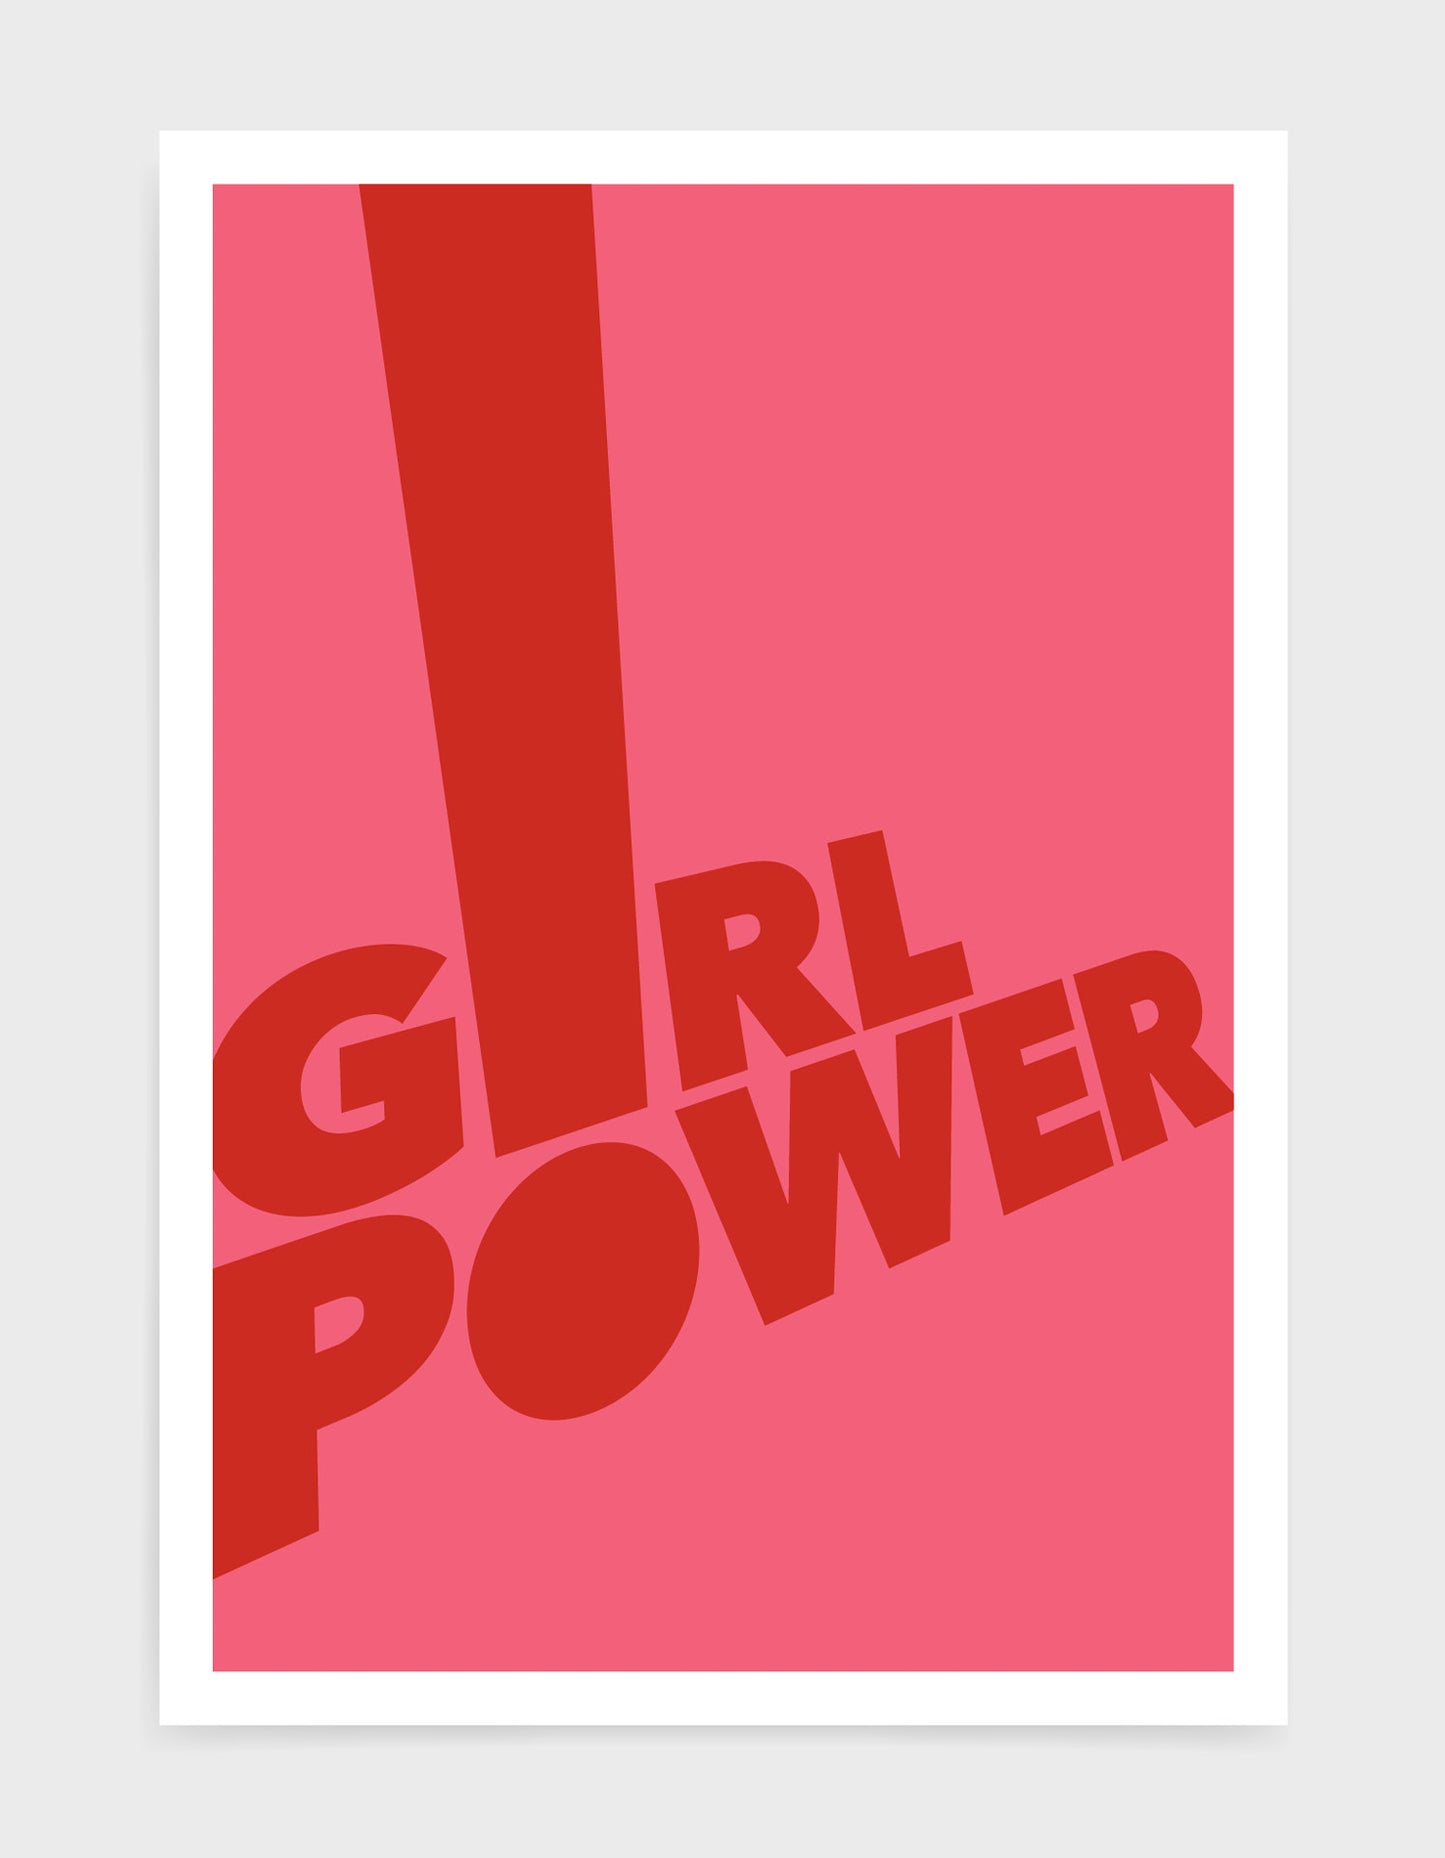 typography art print of the word girl power in red text against a pink background